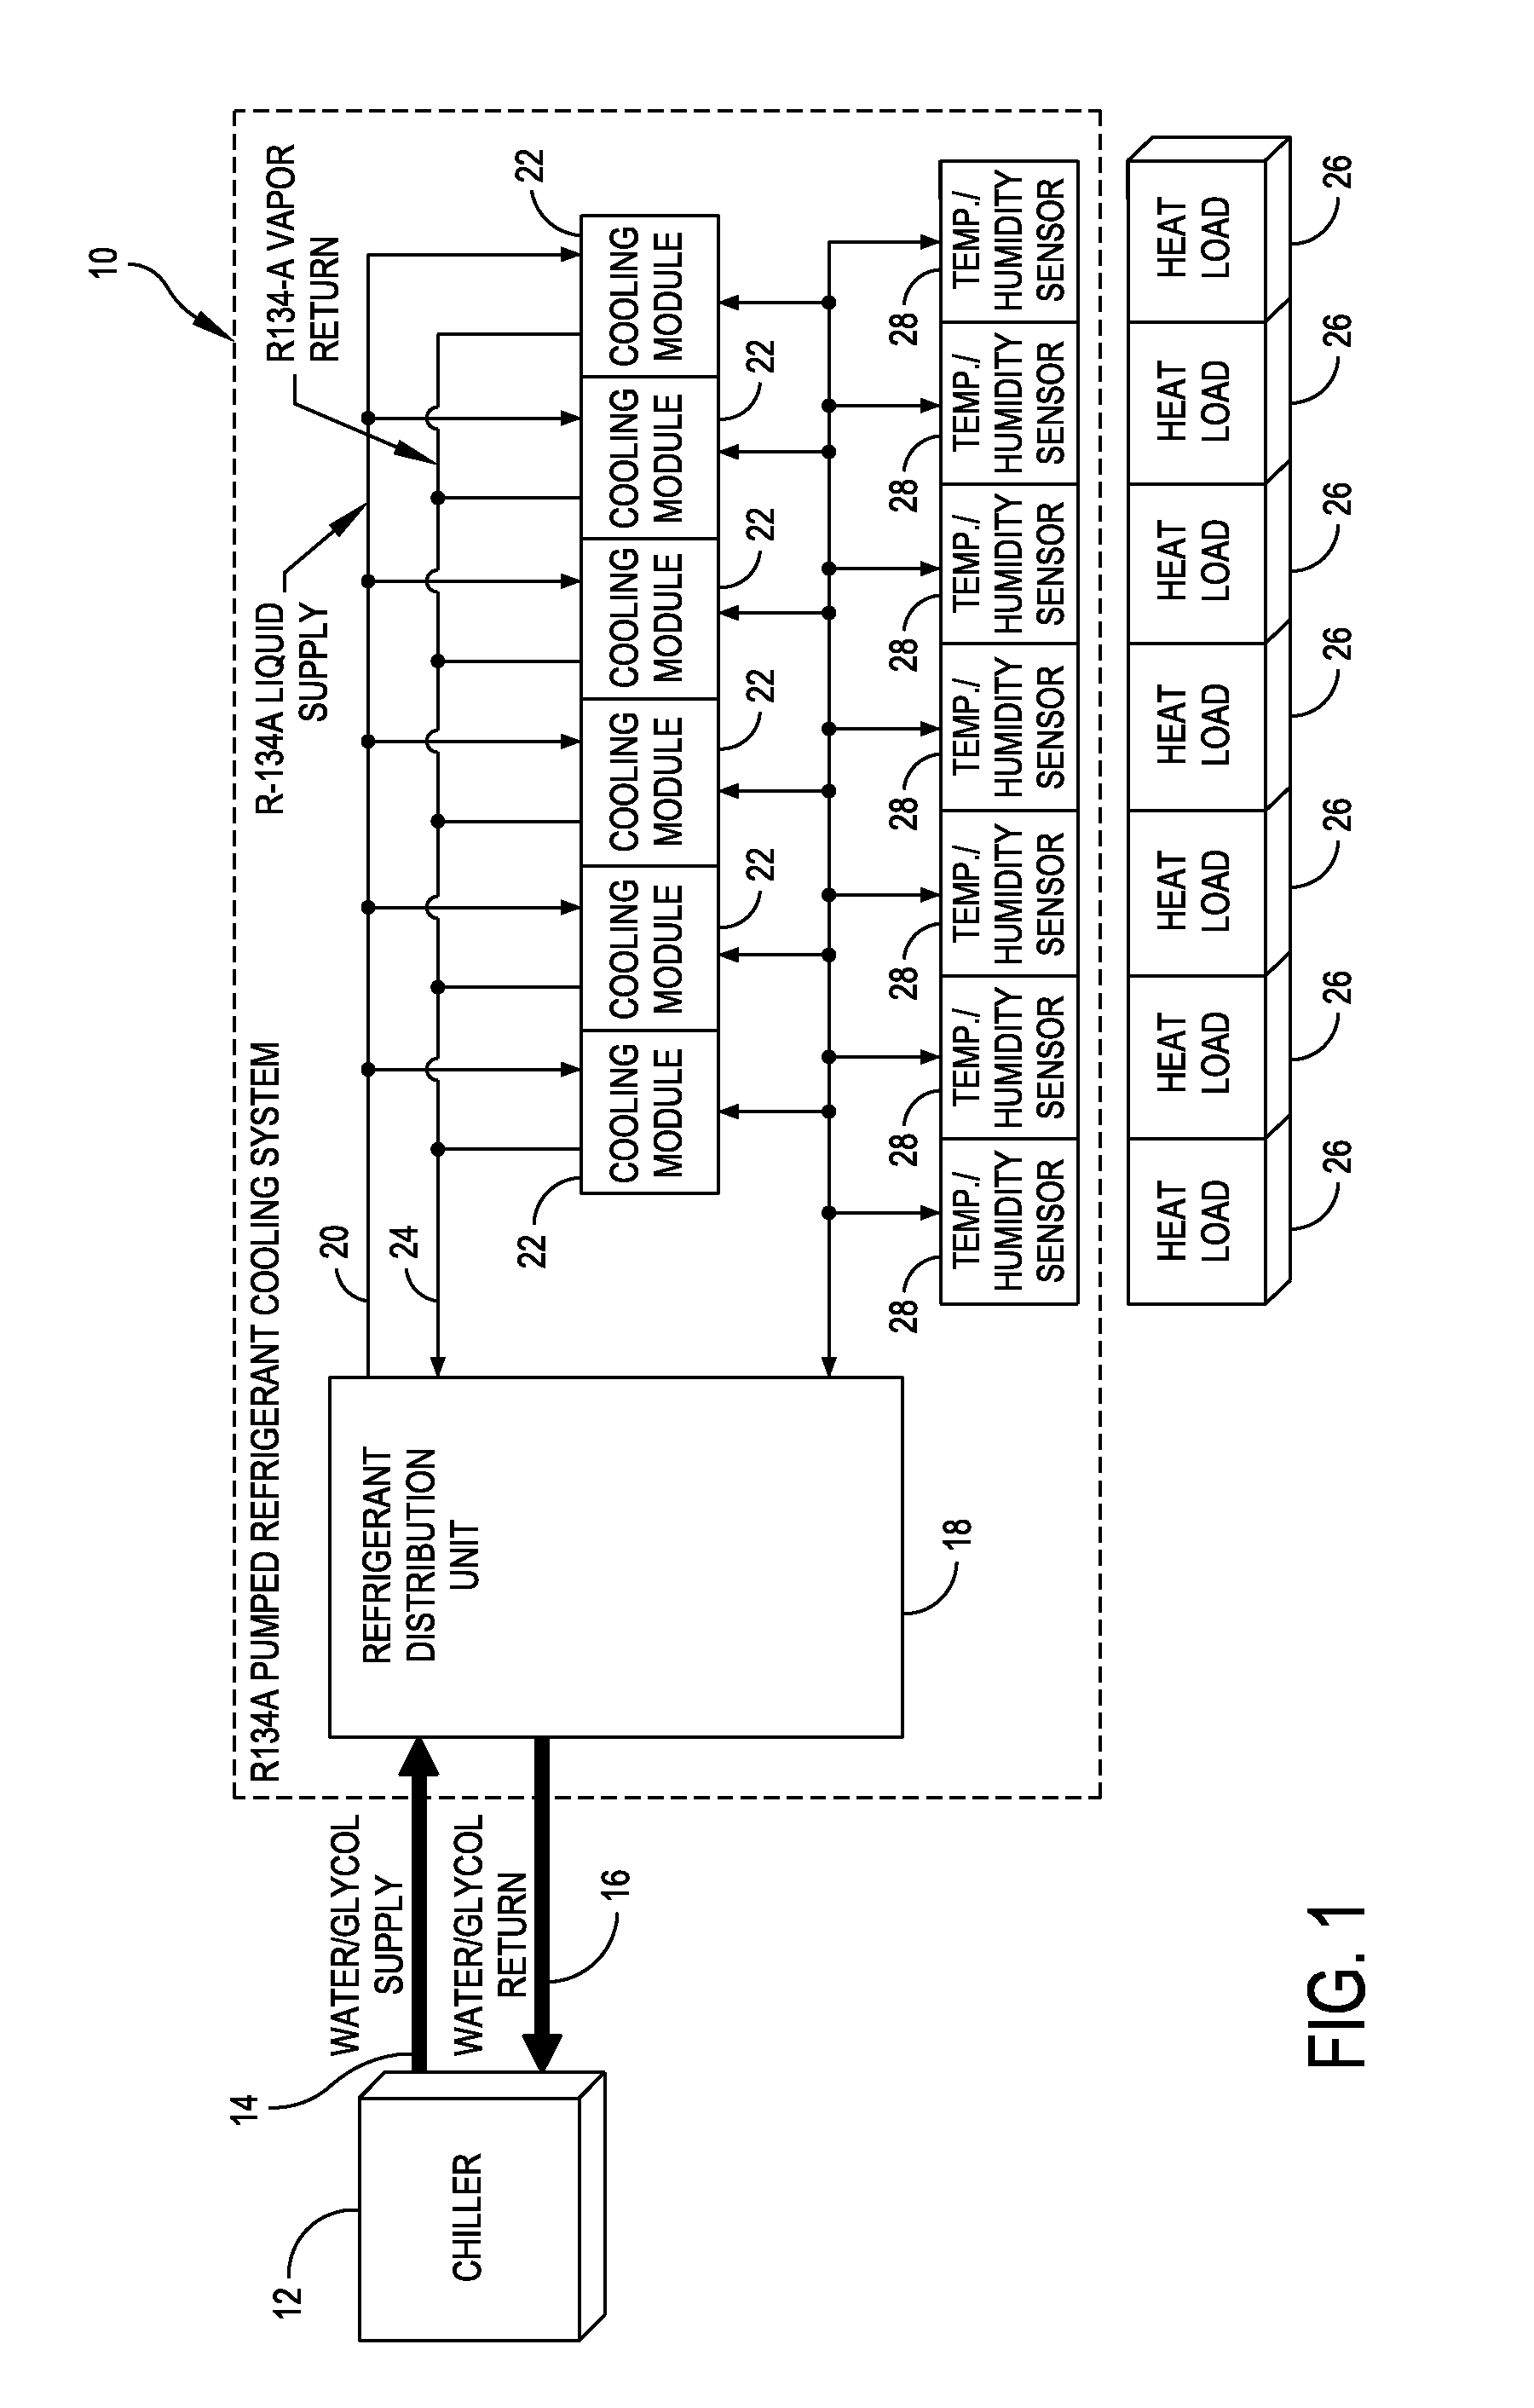 Systems and methods for controlling load dynamics in a pumped refrigerant cooling system